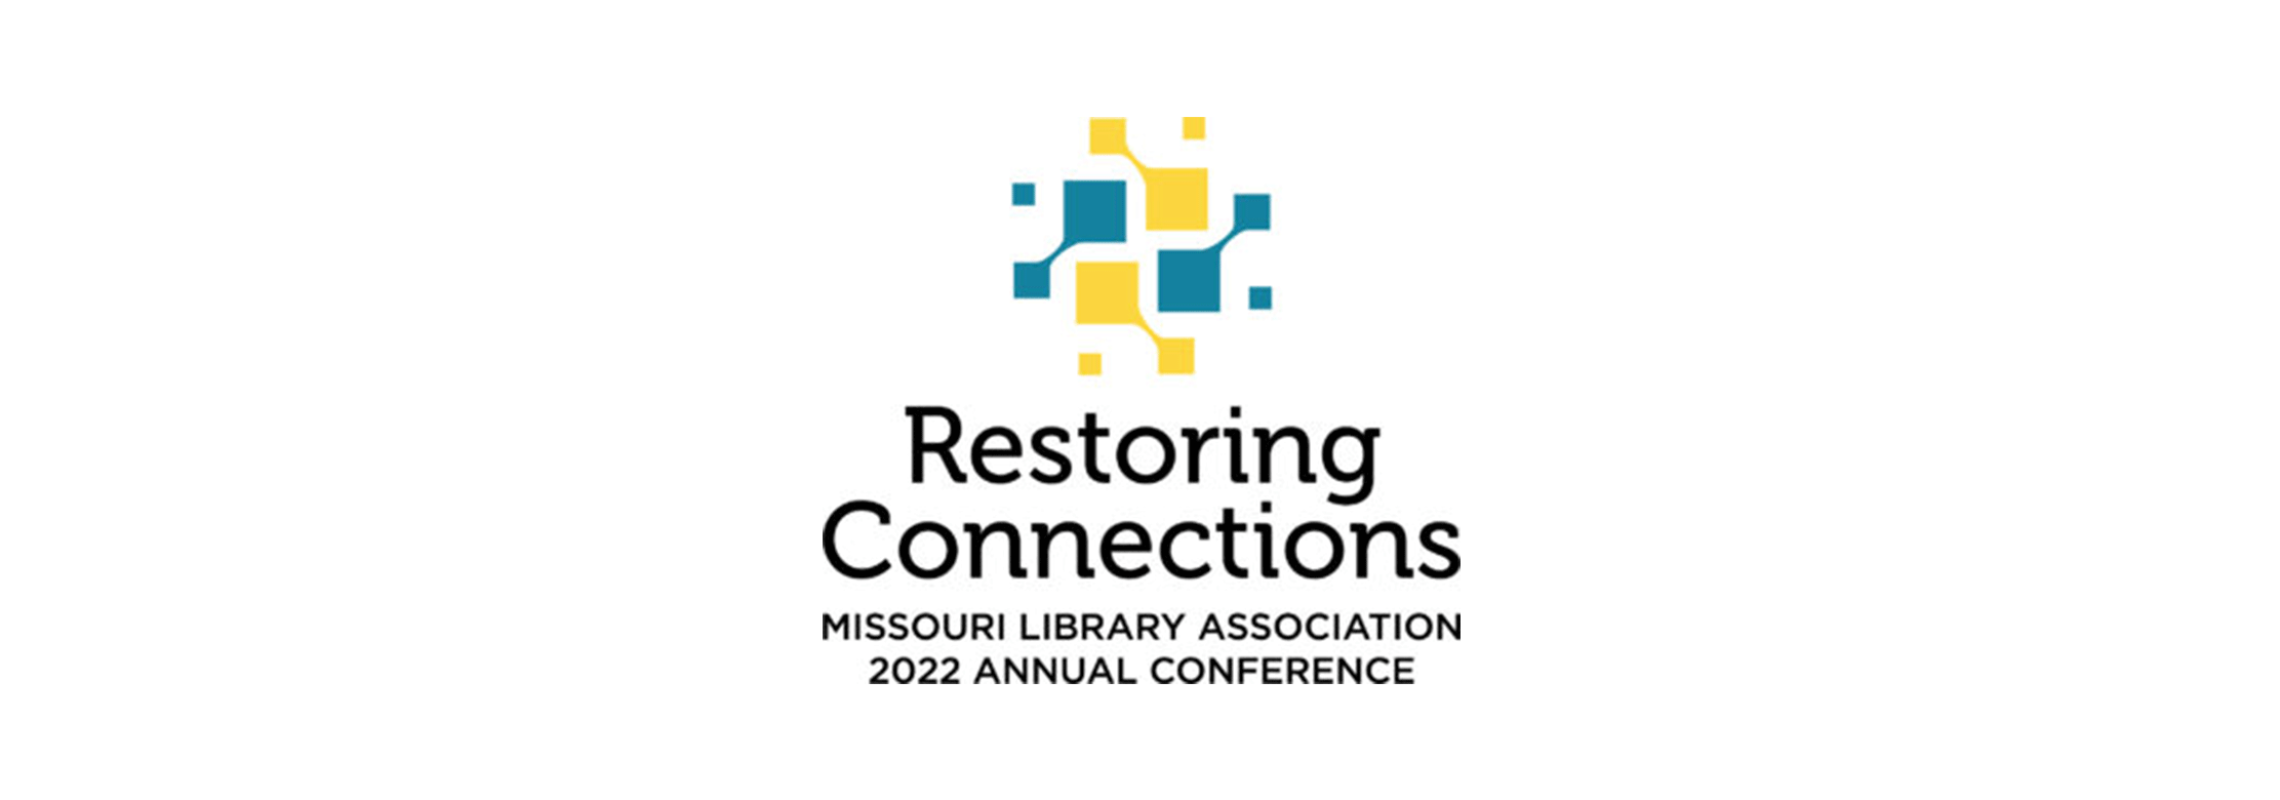 Says "Restoring Connections Missouri Library Association 2022 Annual Conference"